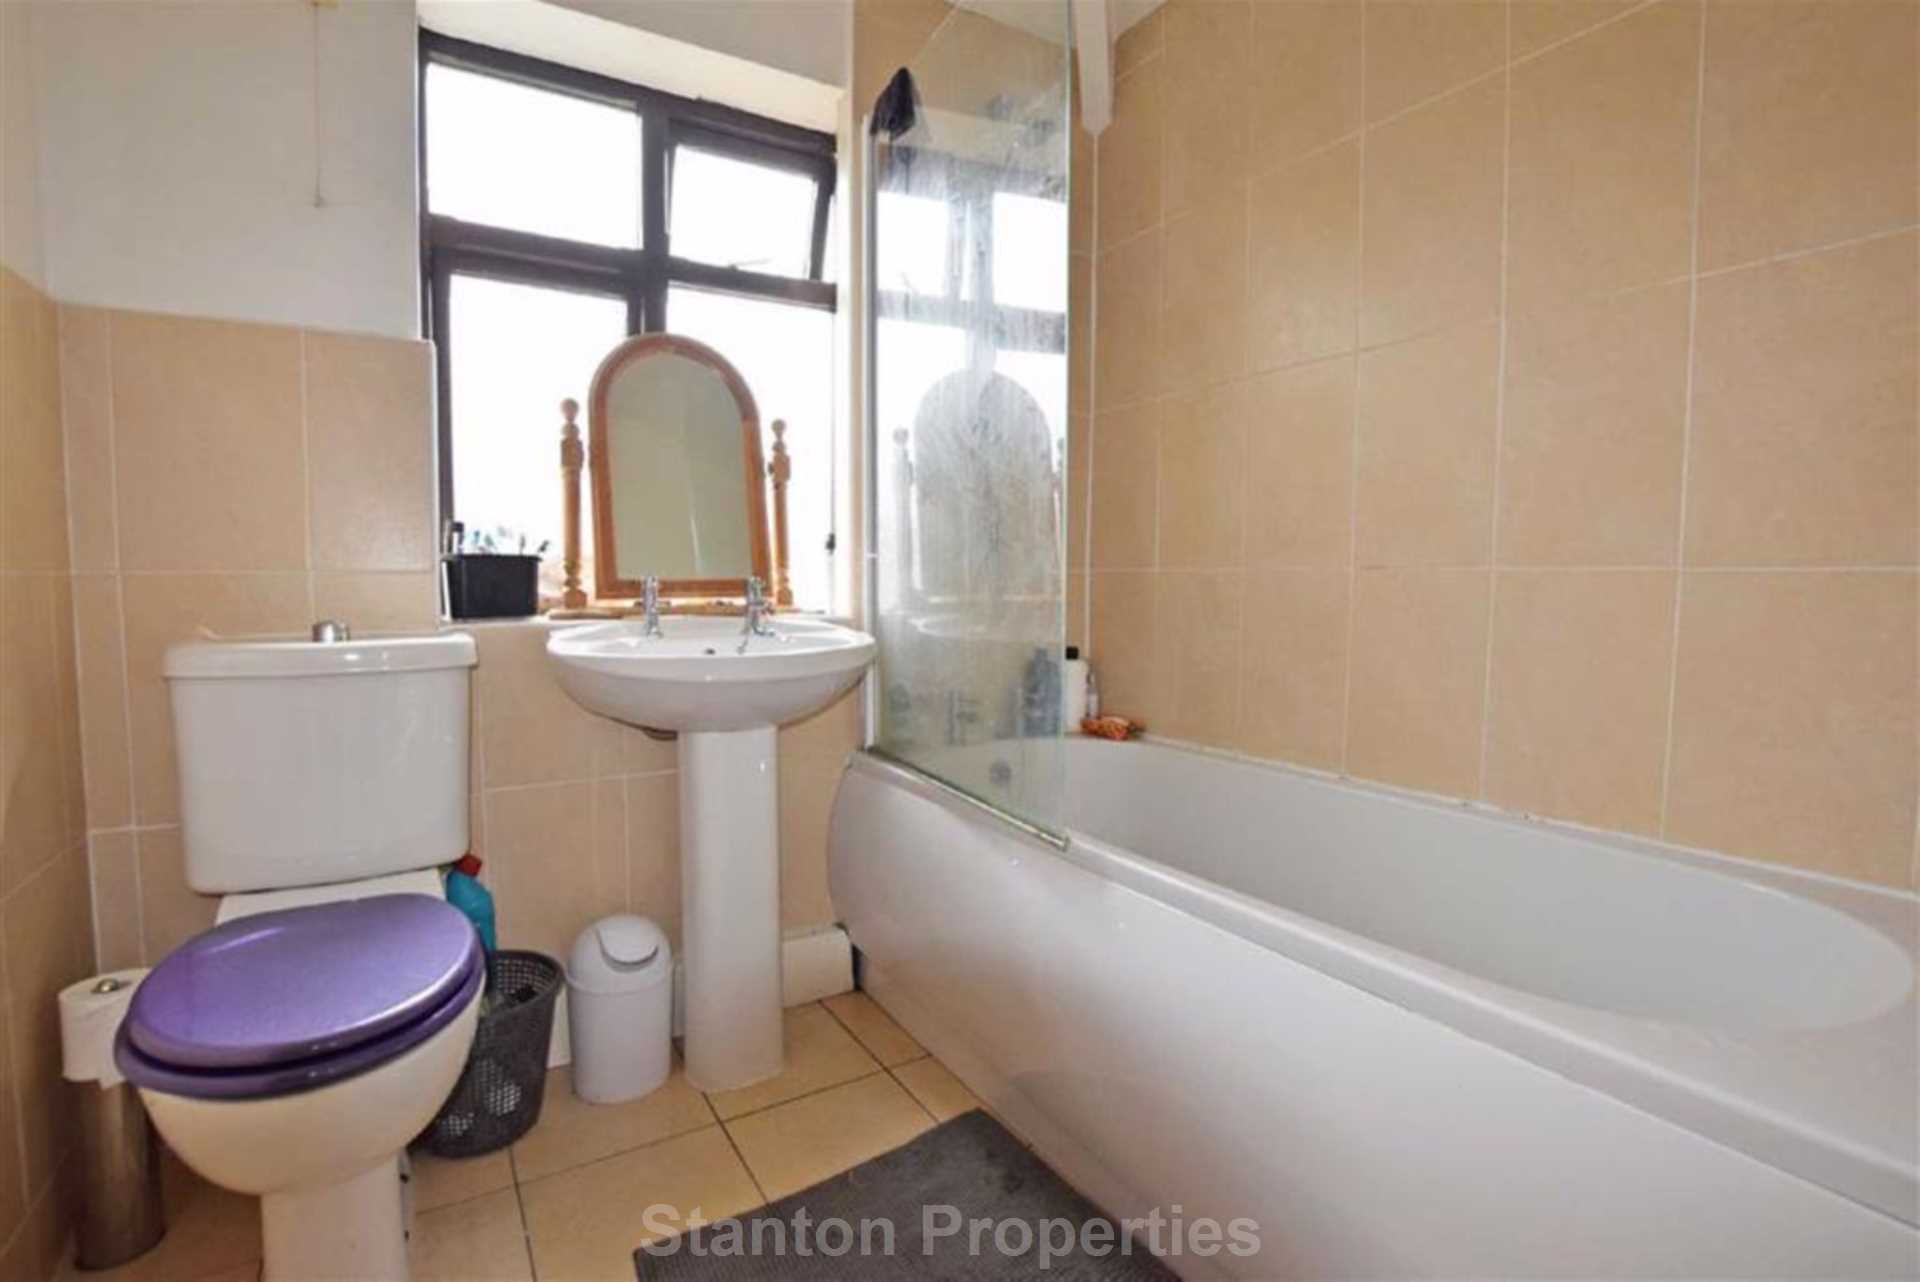 £110 pppw, Arnfield Road, Withington, Image 7